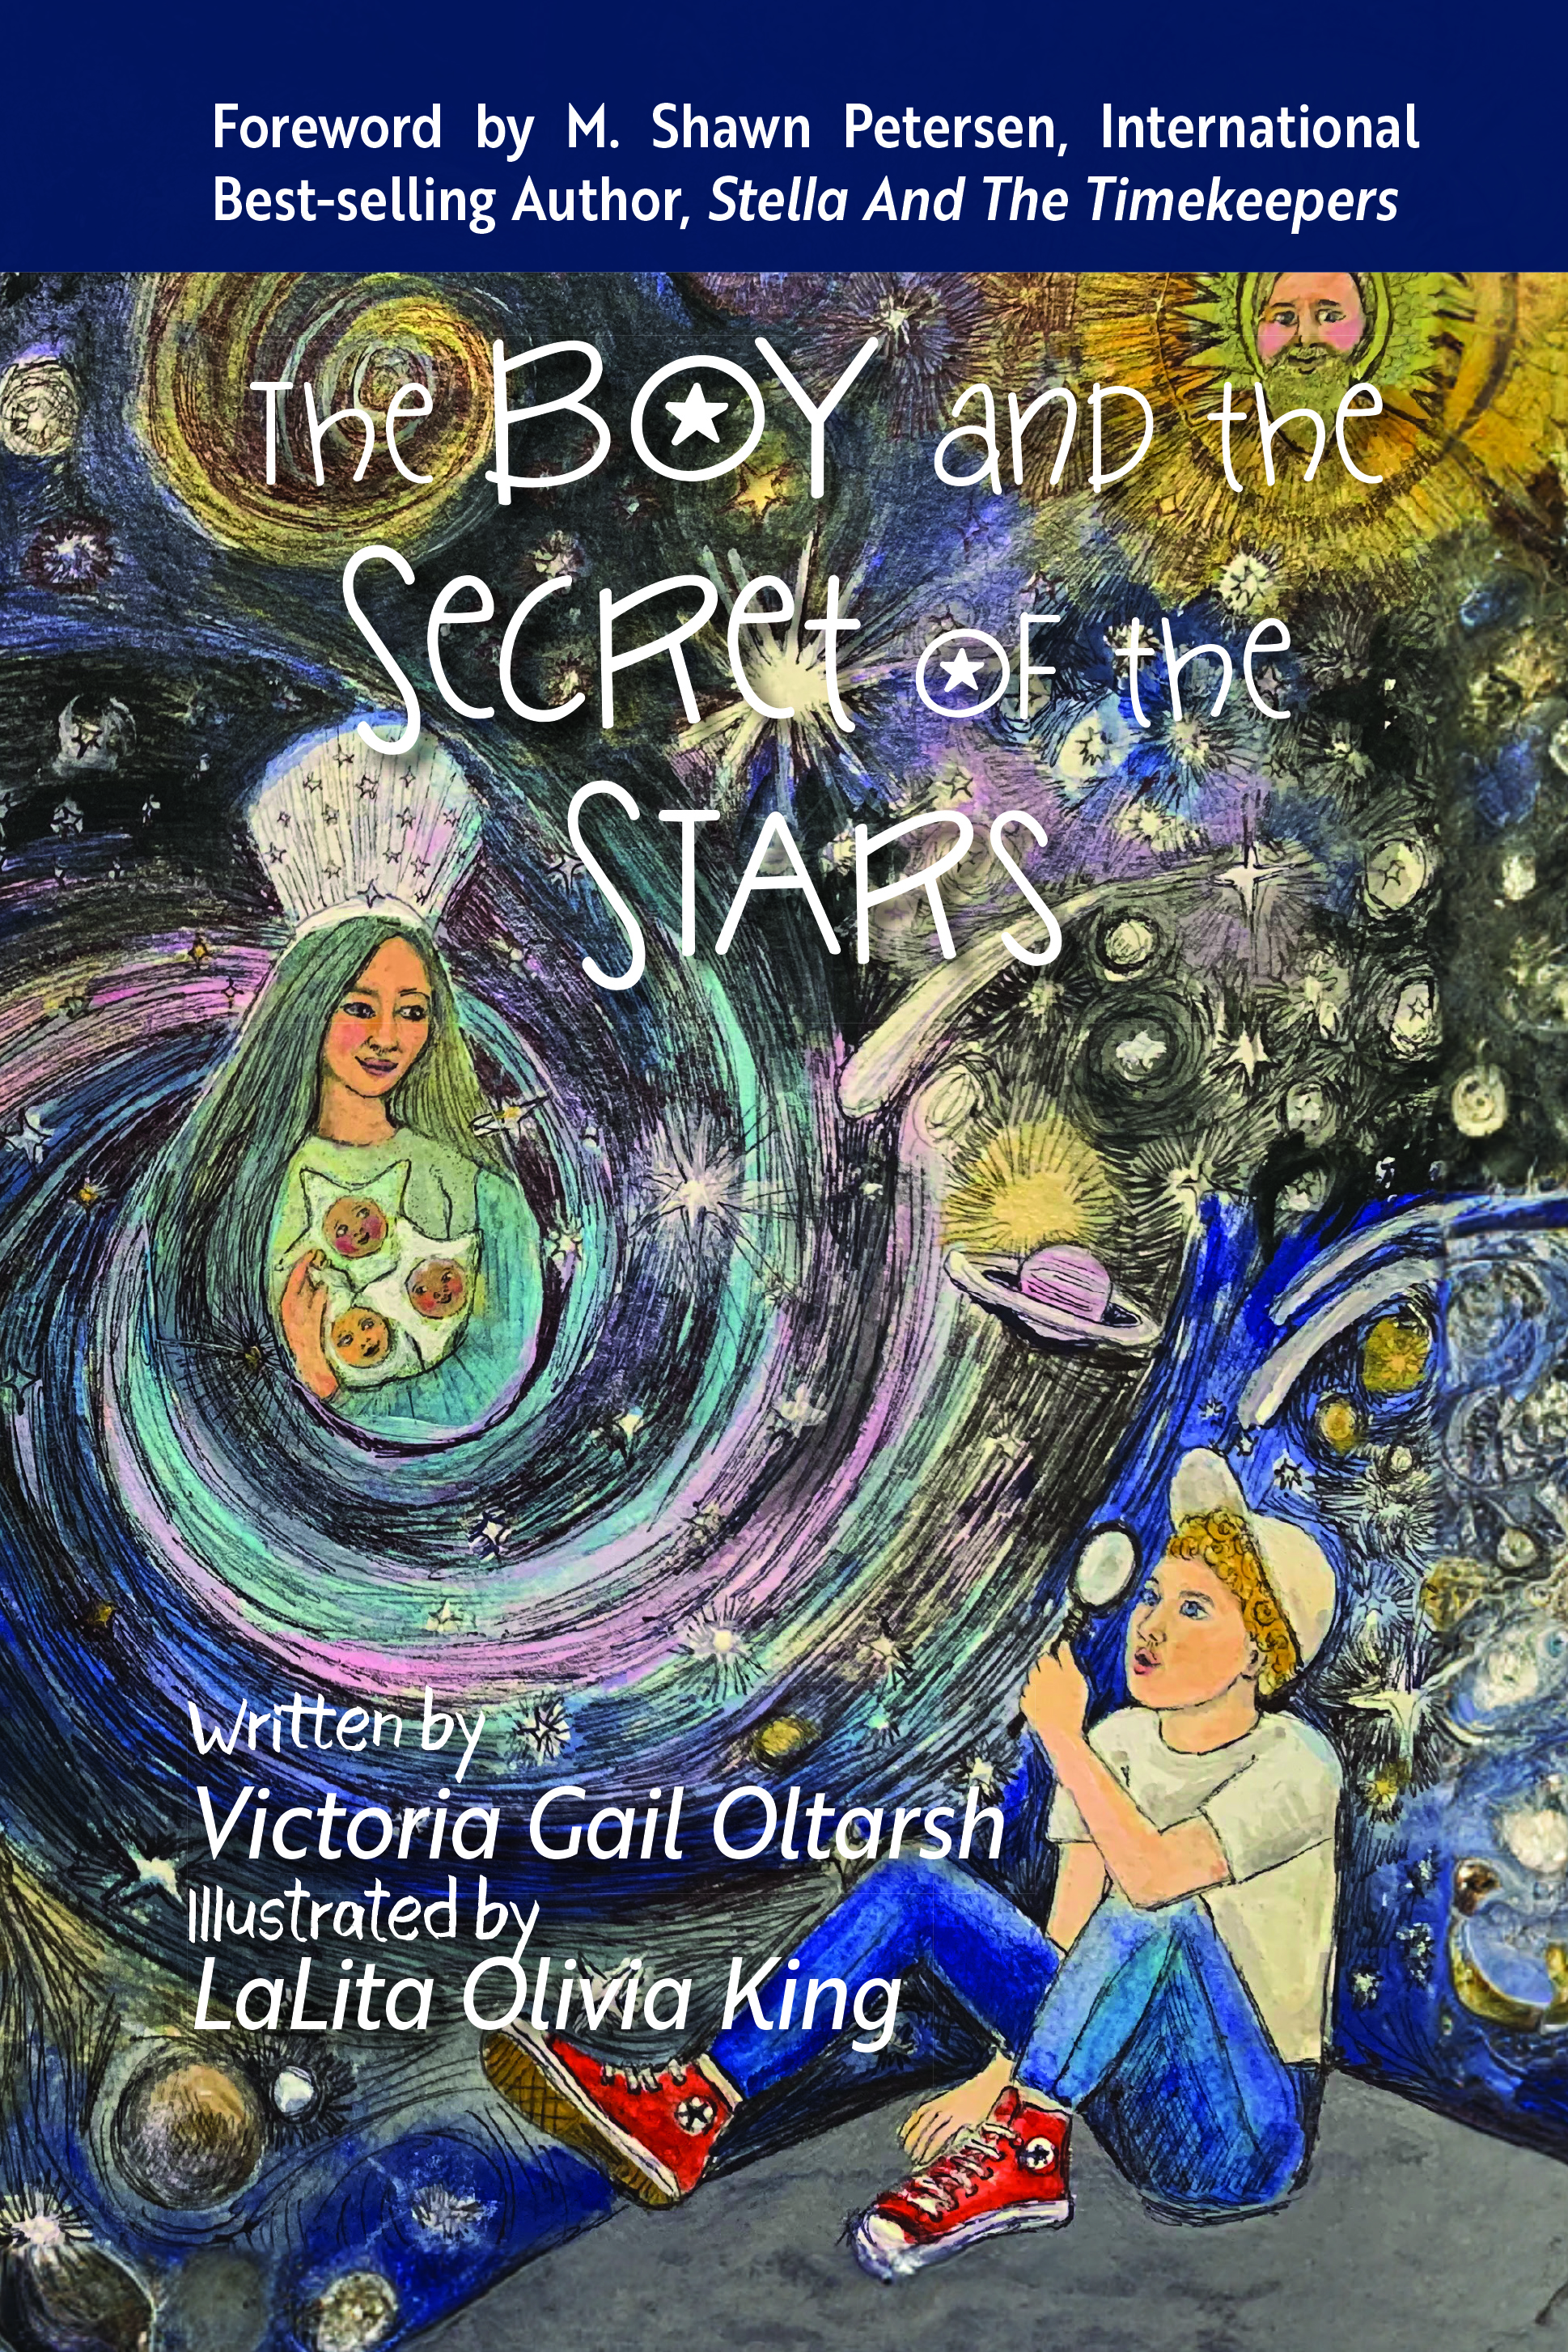 The Boy and the Secret of the Stars by Victoria Gail Oltarsh, Illustrated by LaLita Olivia King